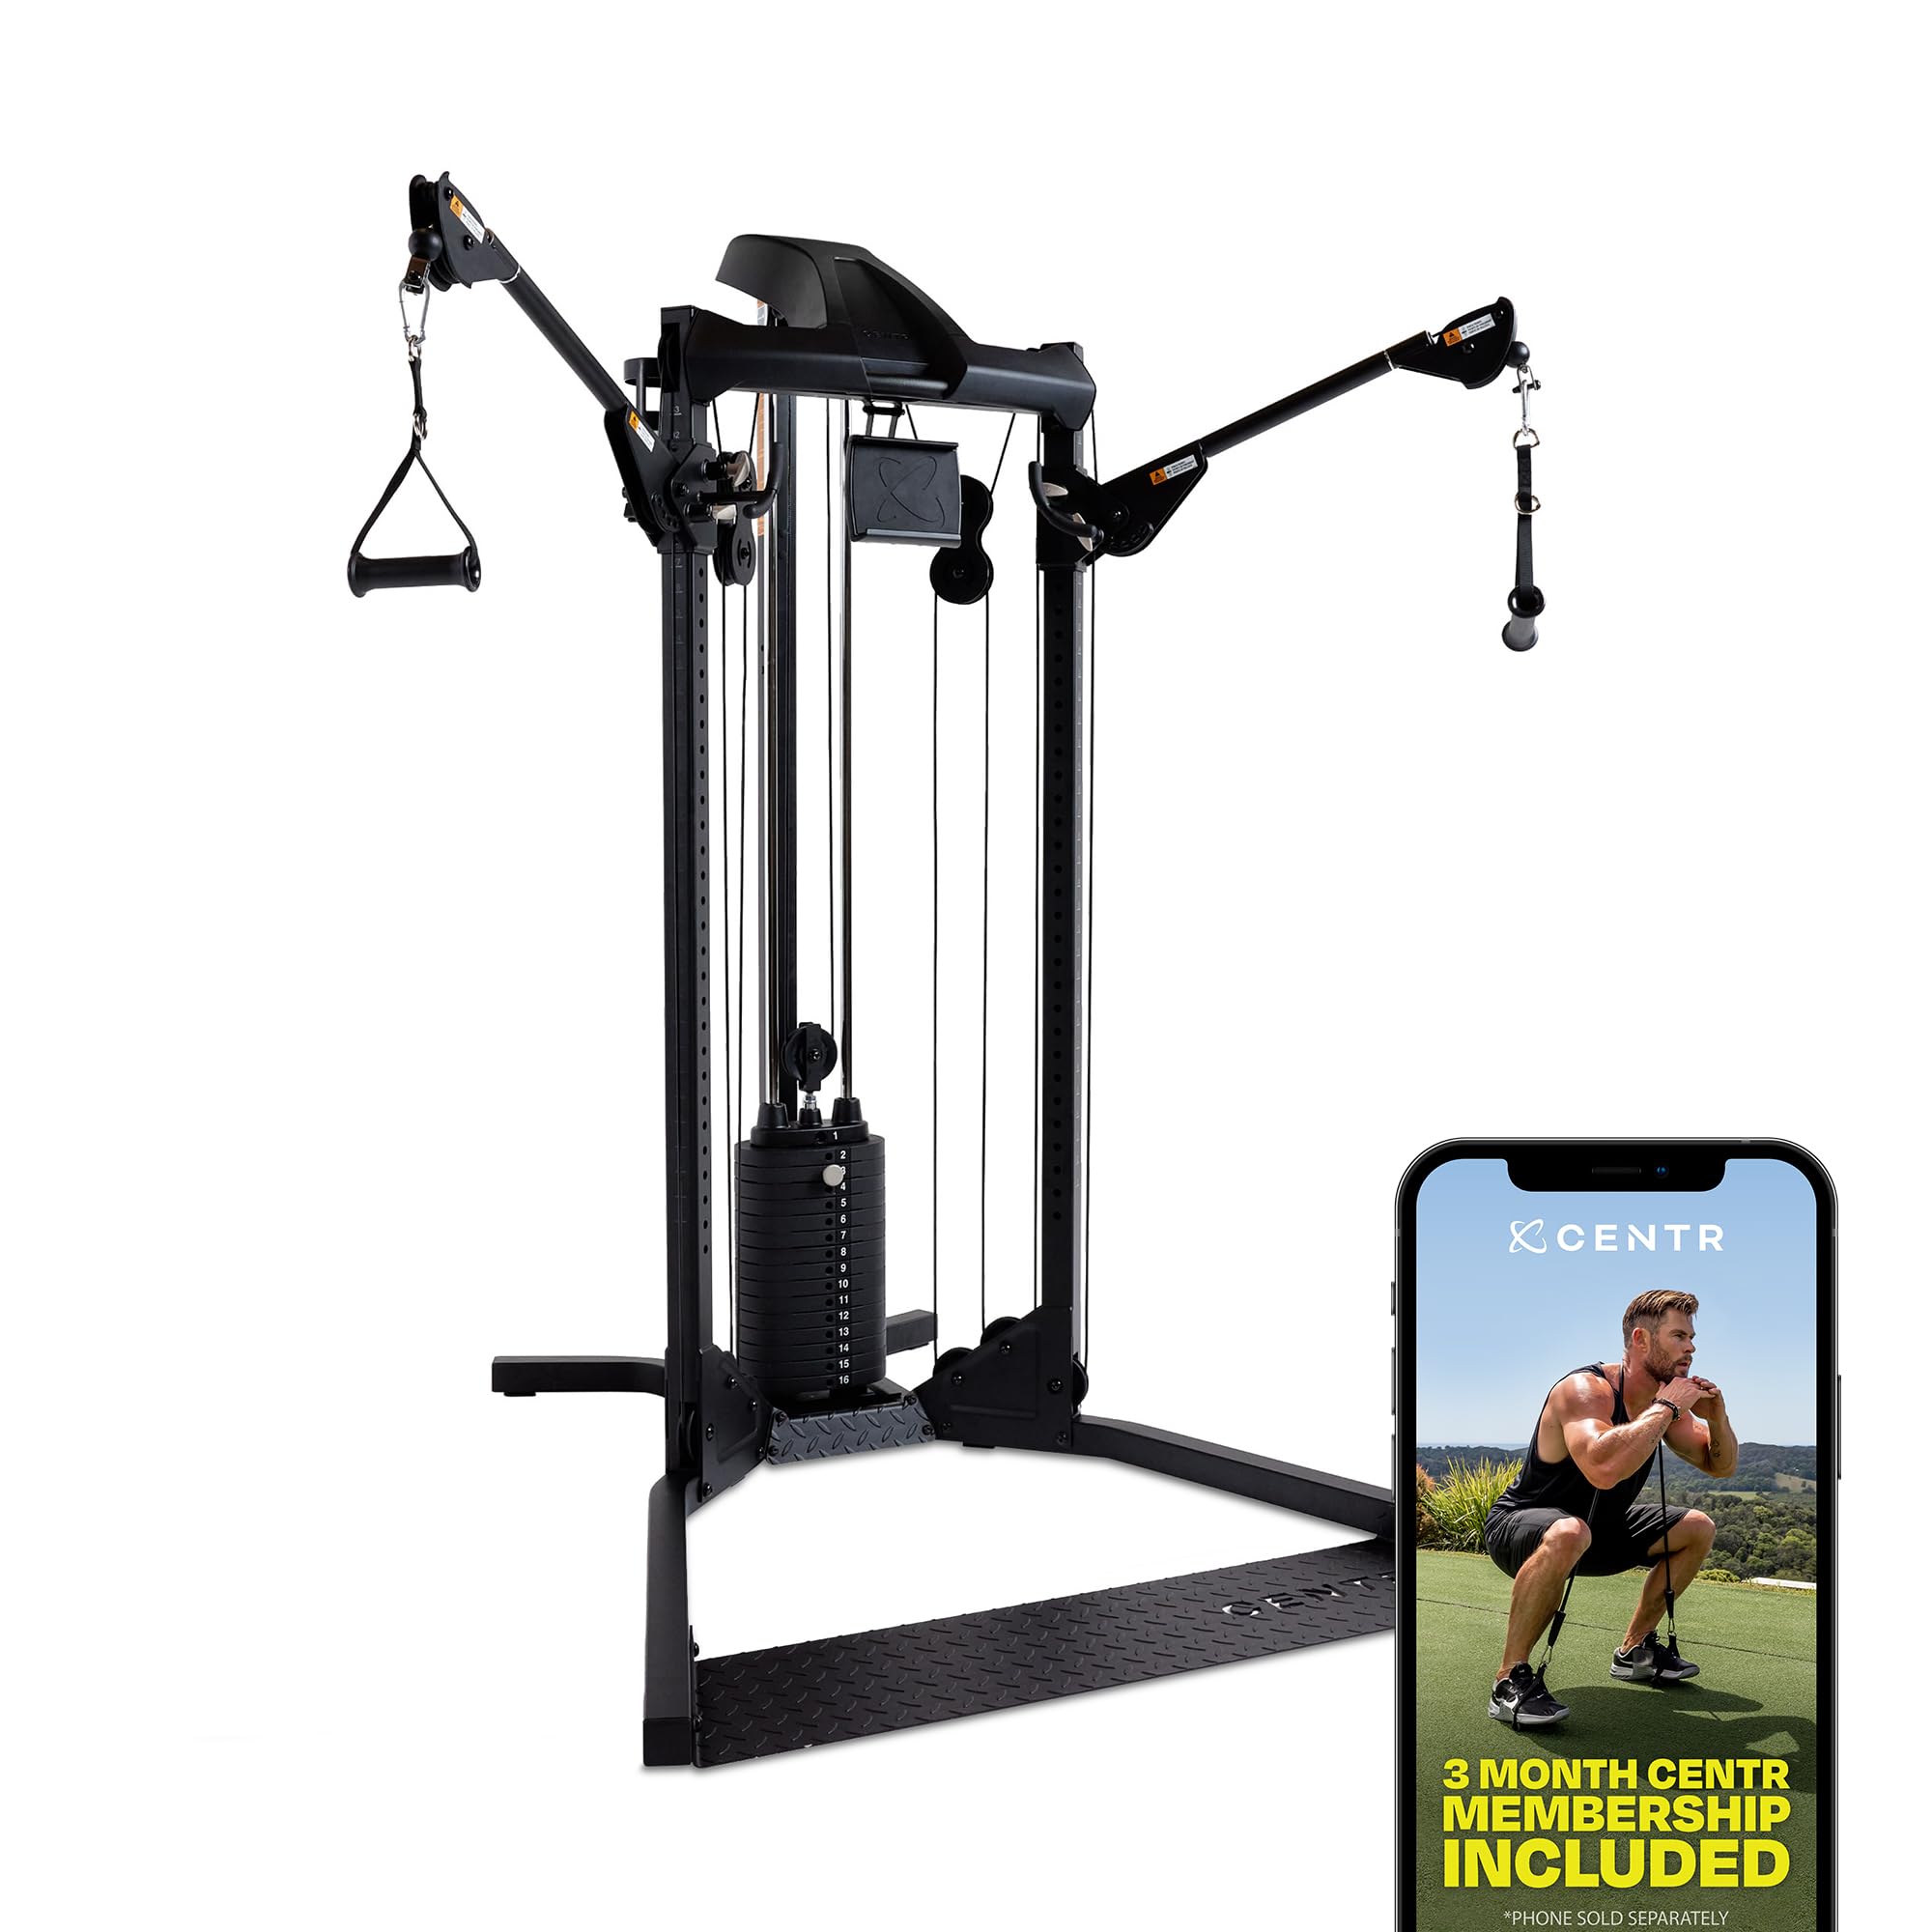 Home Gym Functional Trainer - Multifunctional Cable Machine Home Gym System - Workout Weight Machine for Strength Training - Full Body Compact Exercise & Fitness Equipment Set